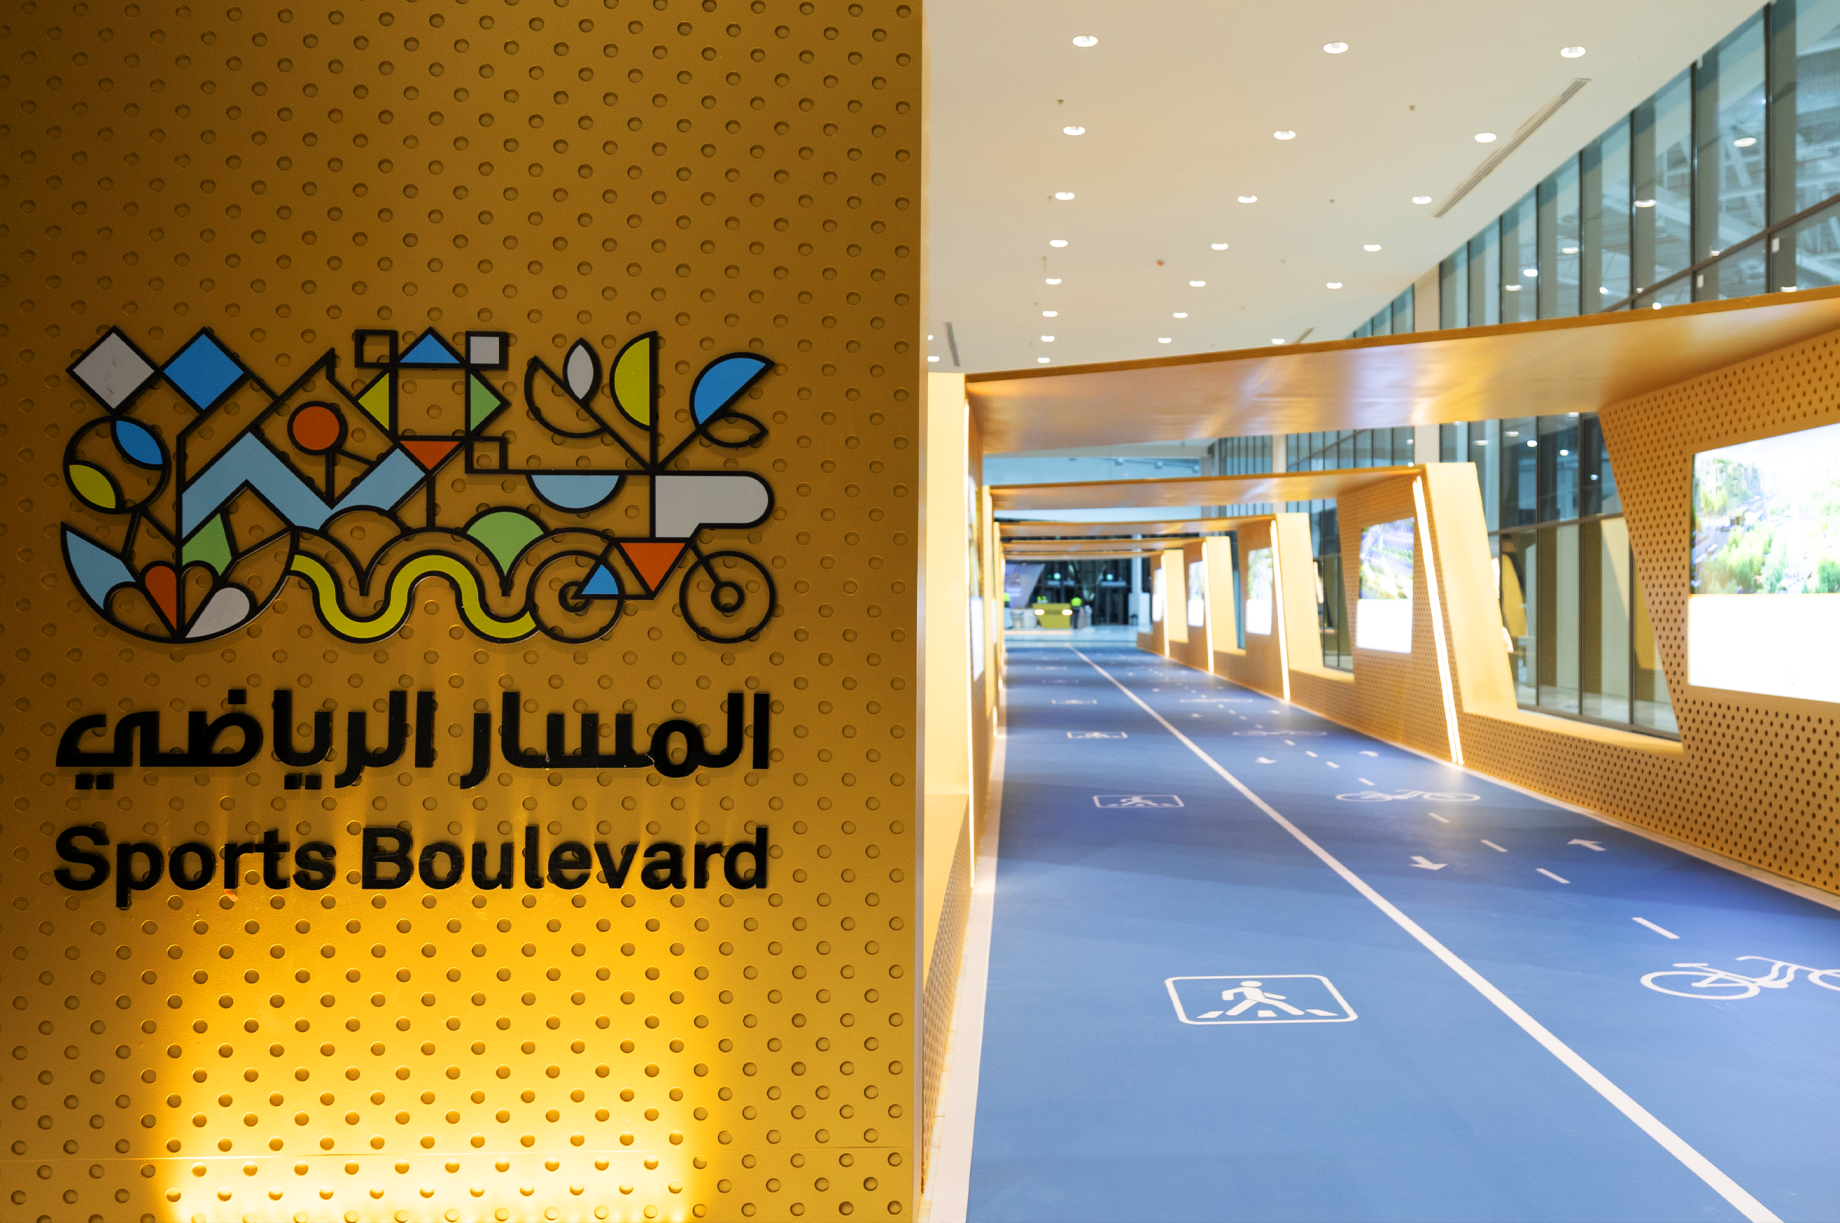 The Sports Boulevard will play a key role as a strategic partner at this year’s Cityscape Global, a major real estate event in Riyadh Exhibition